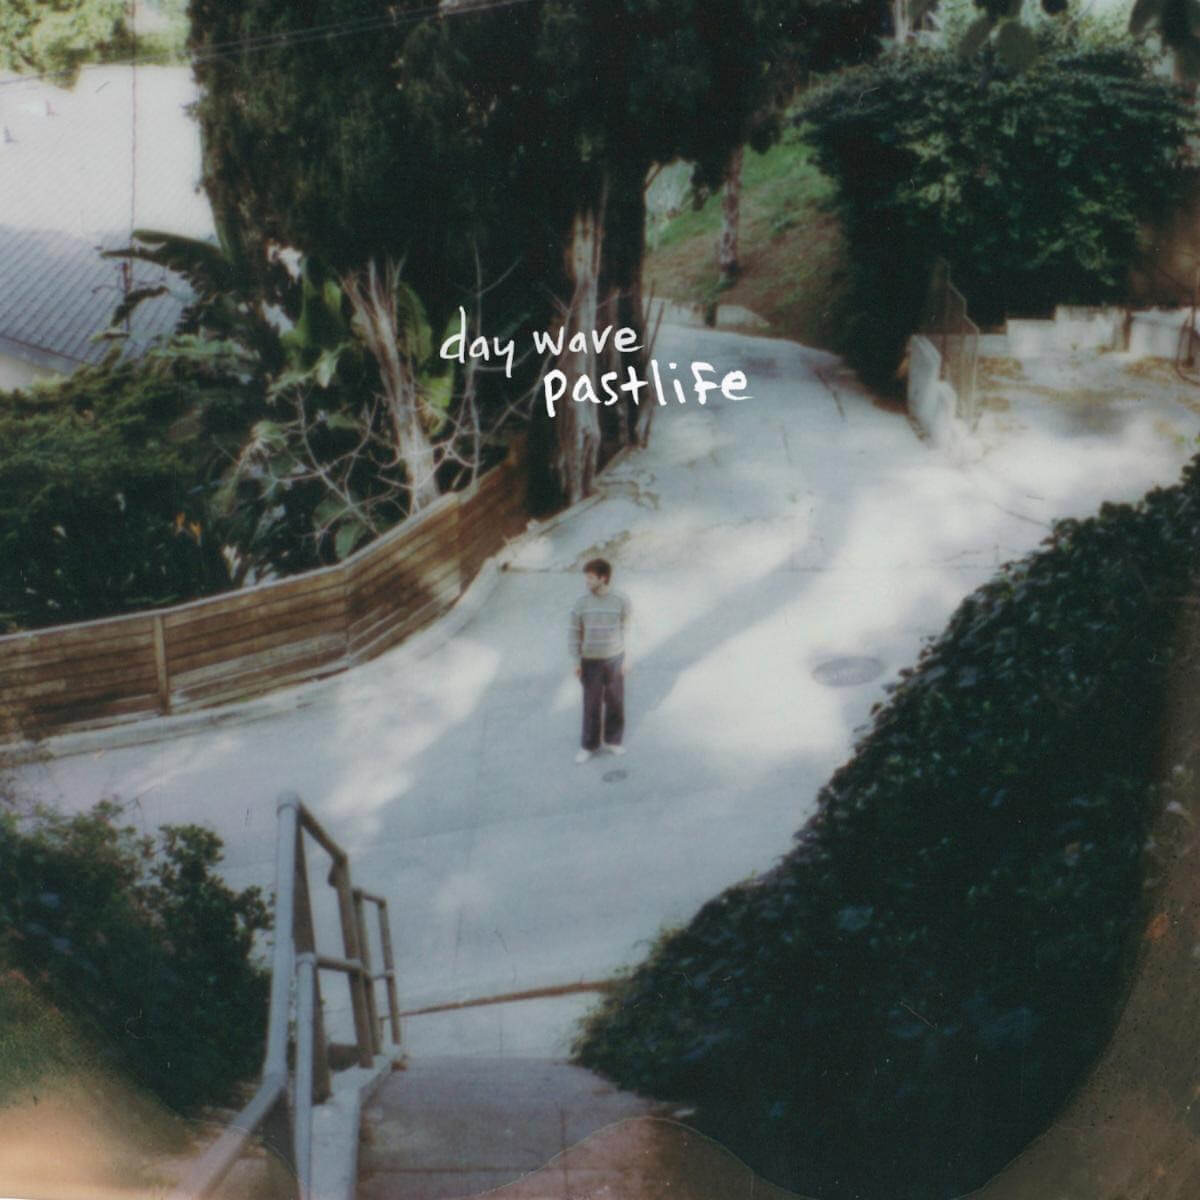 Day Wave Announces New Album 'Pastlife,' ahead of the release he has shared the album's title-track. The LP drops on June 24, 2022 via PIAS